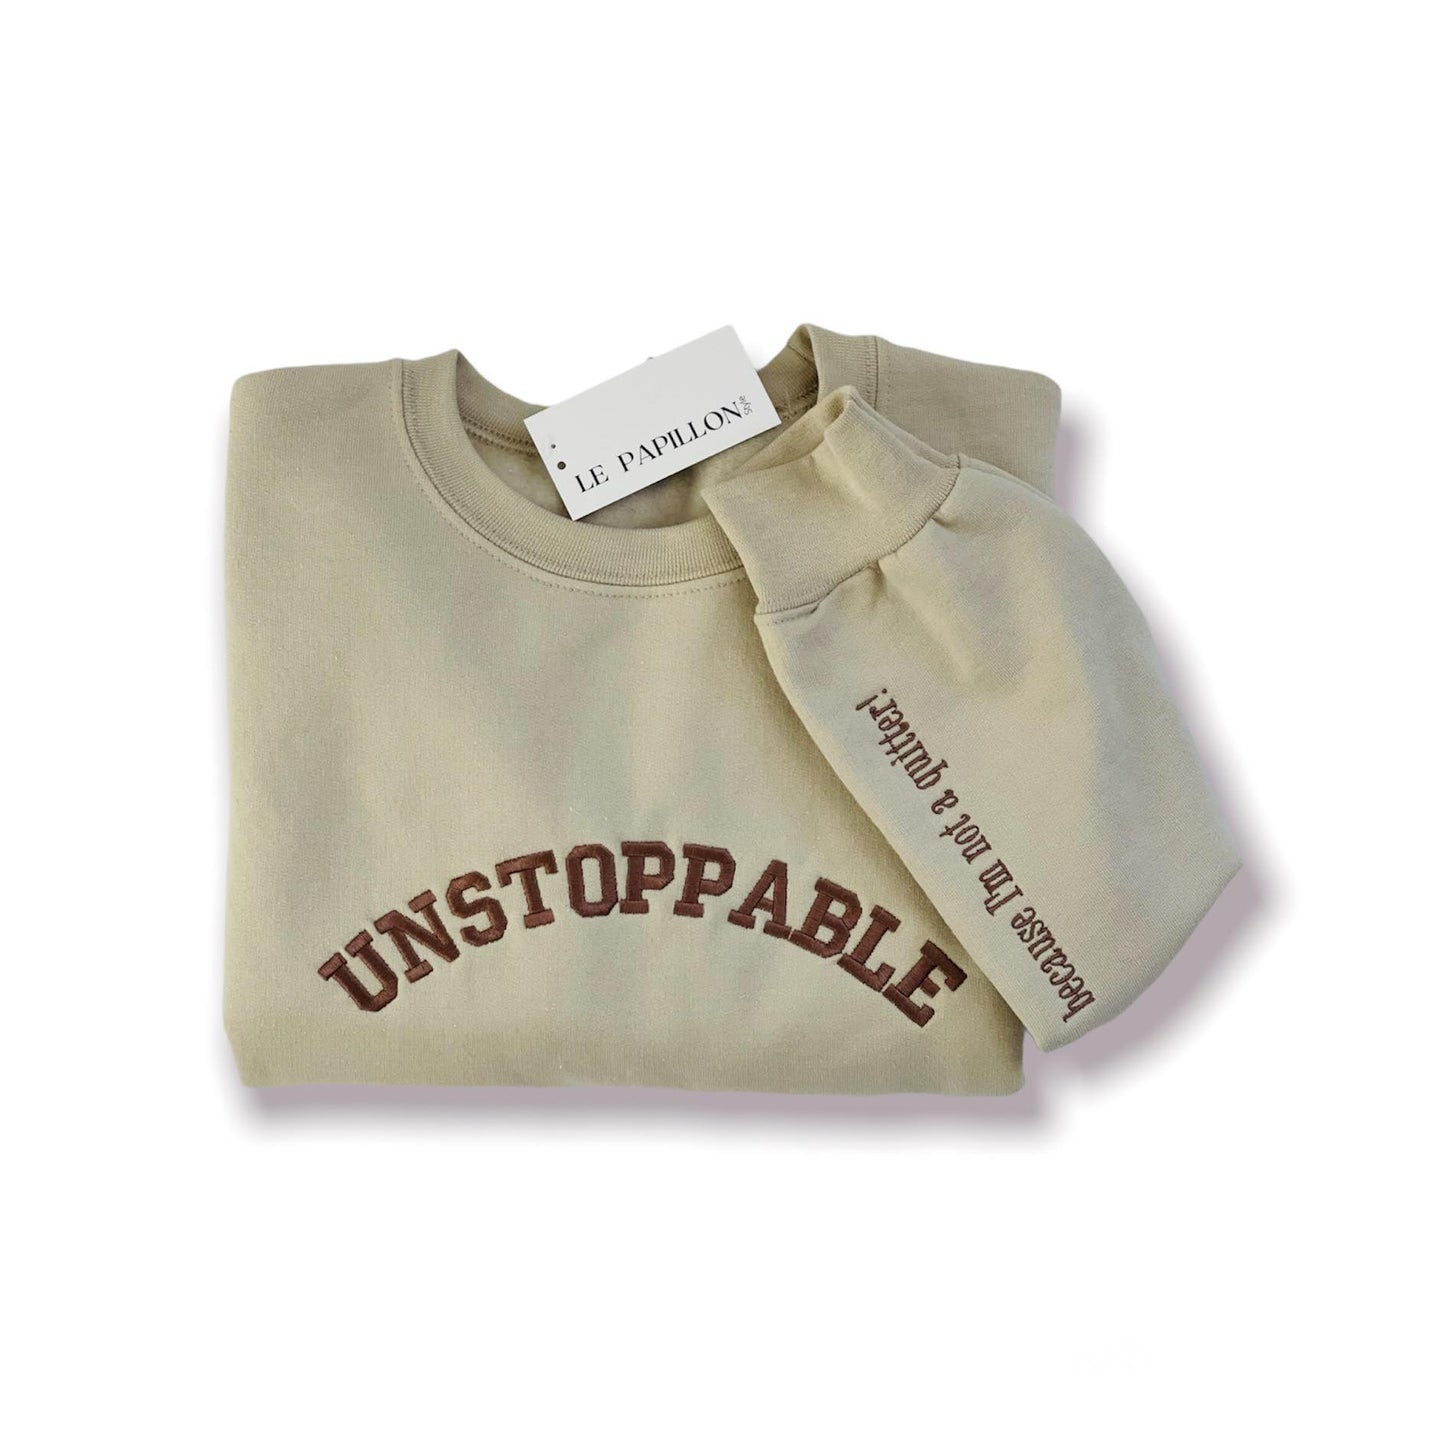 Unstoppable, because I'm not a quitter Sweatshirt